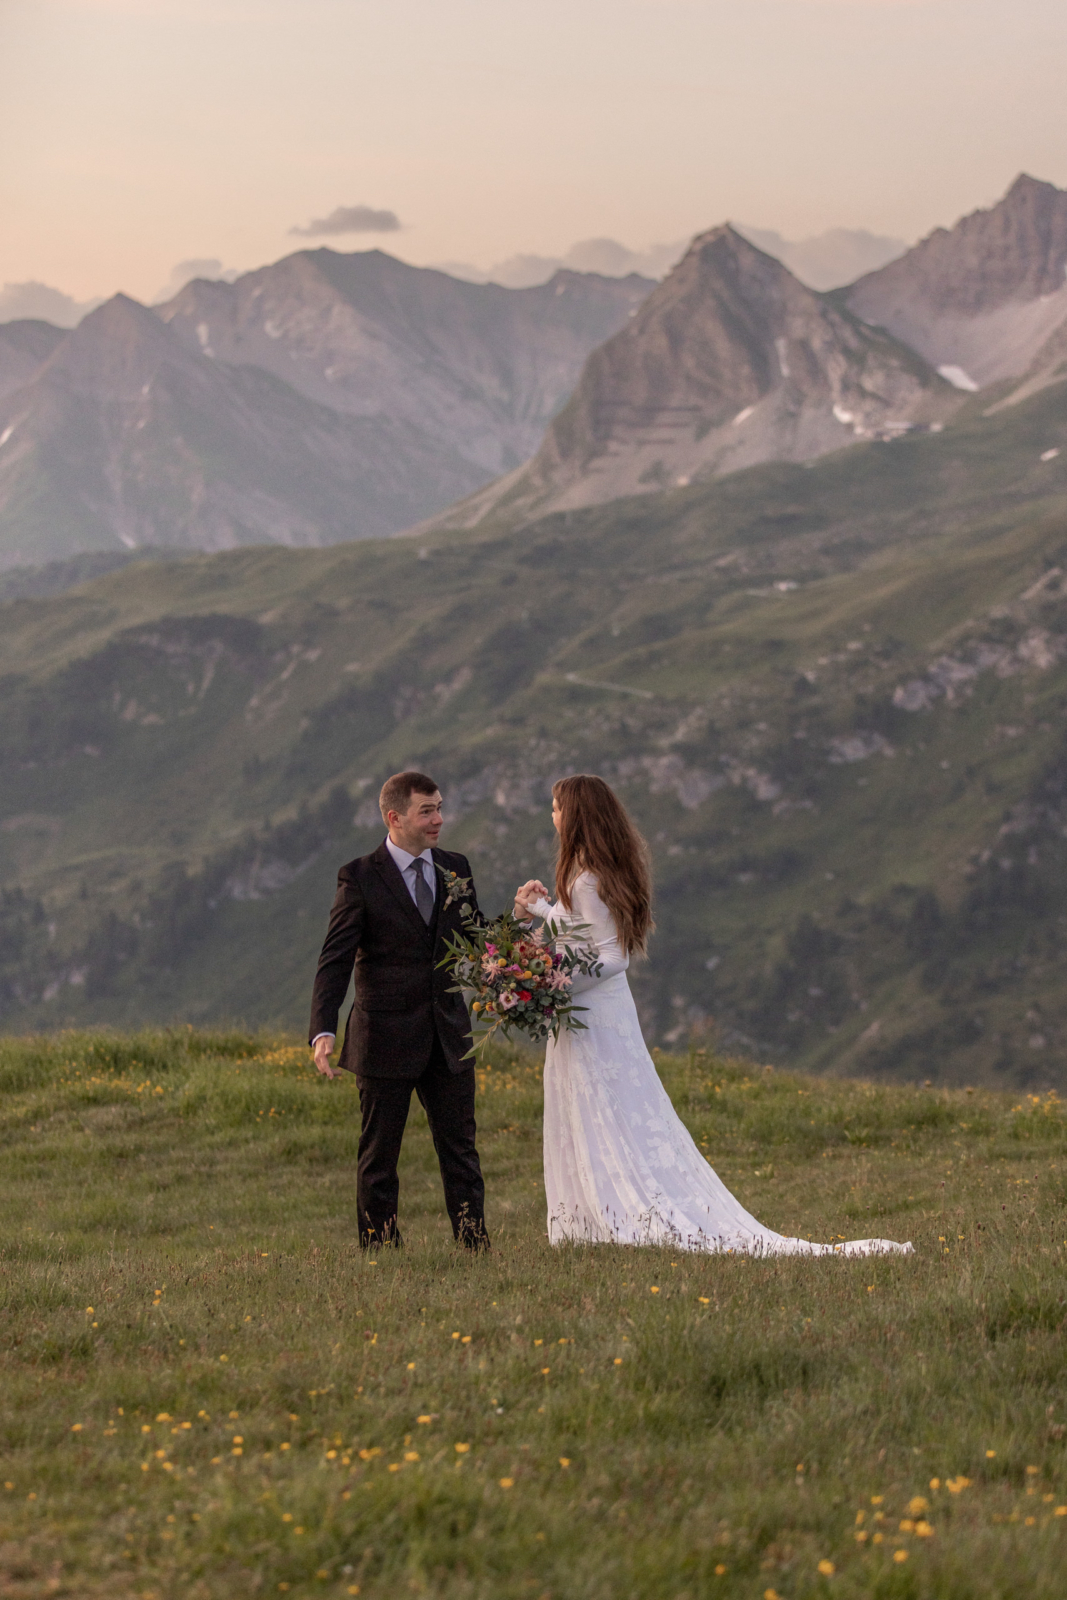 First Look before the wedding ceremony in the mountains in Austria